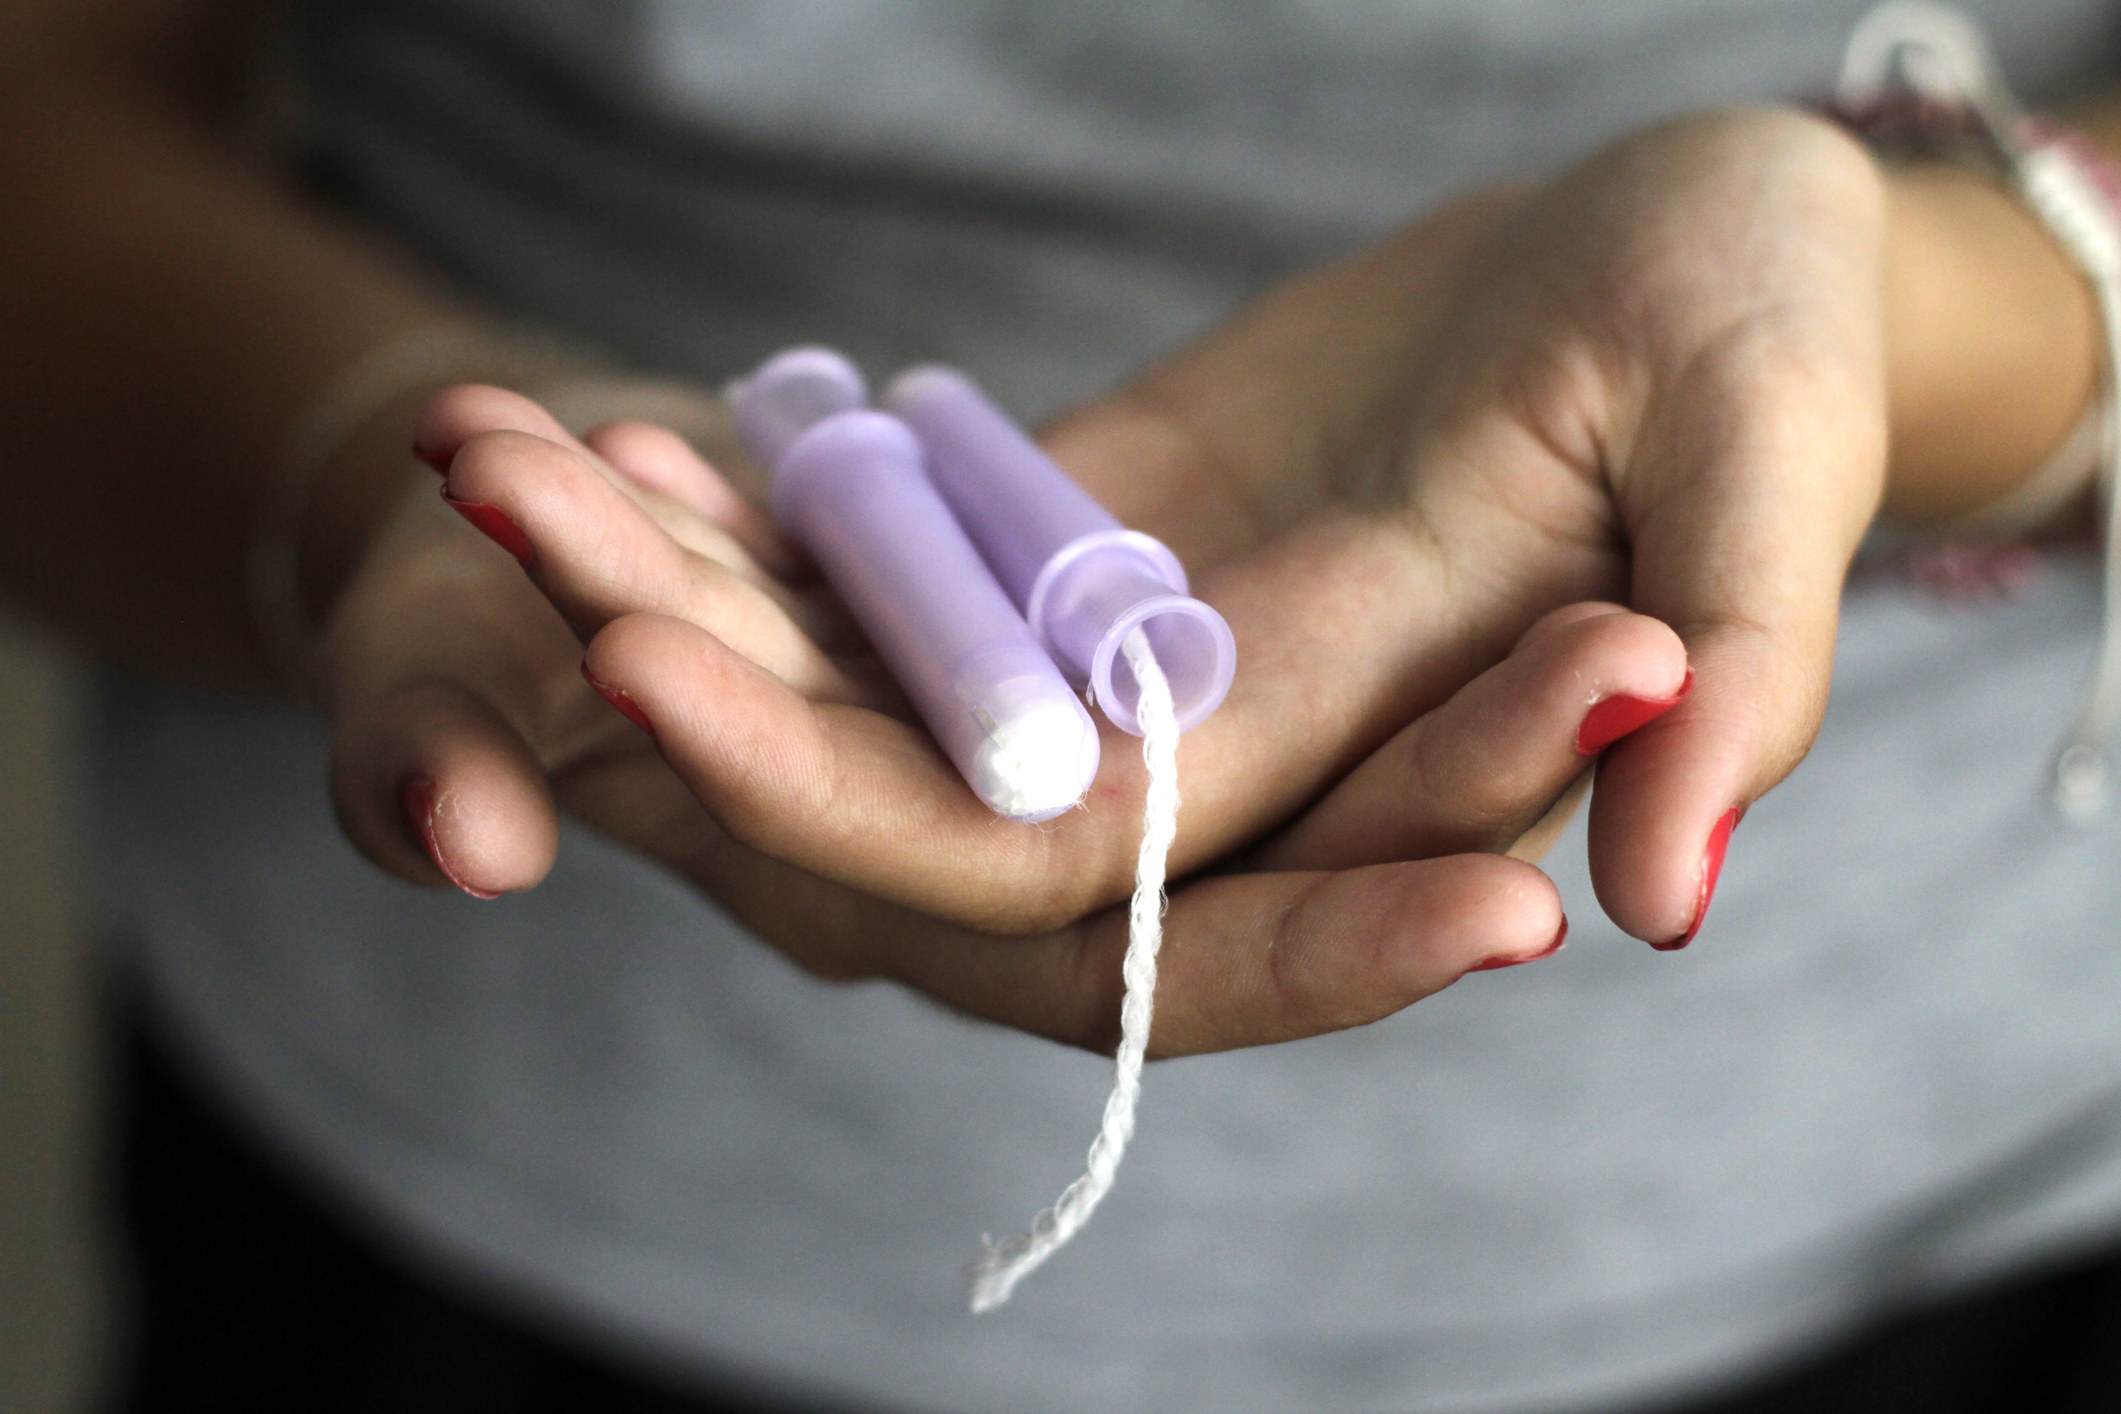 A woman holding a tampon.